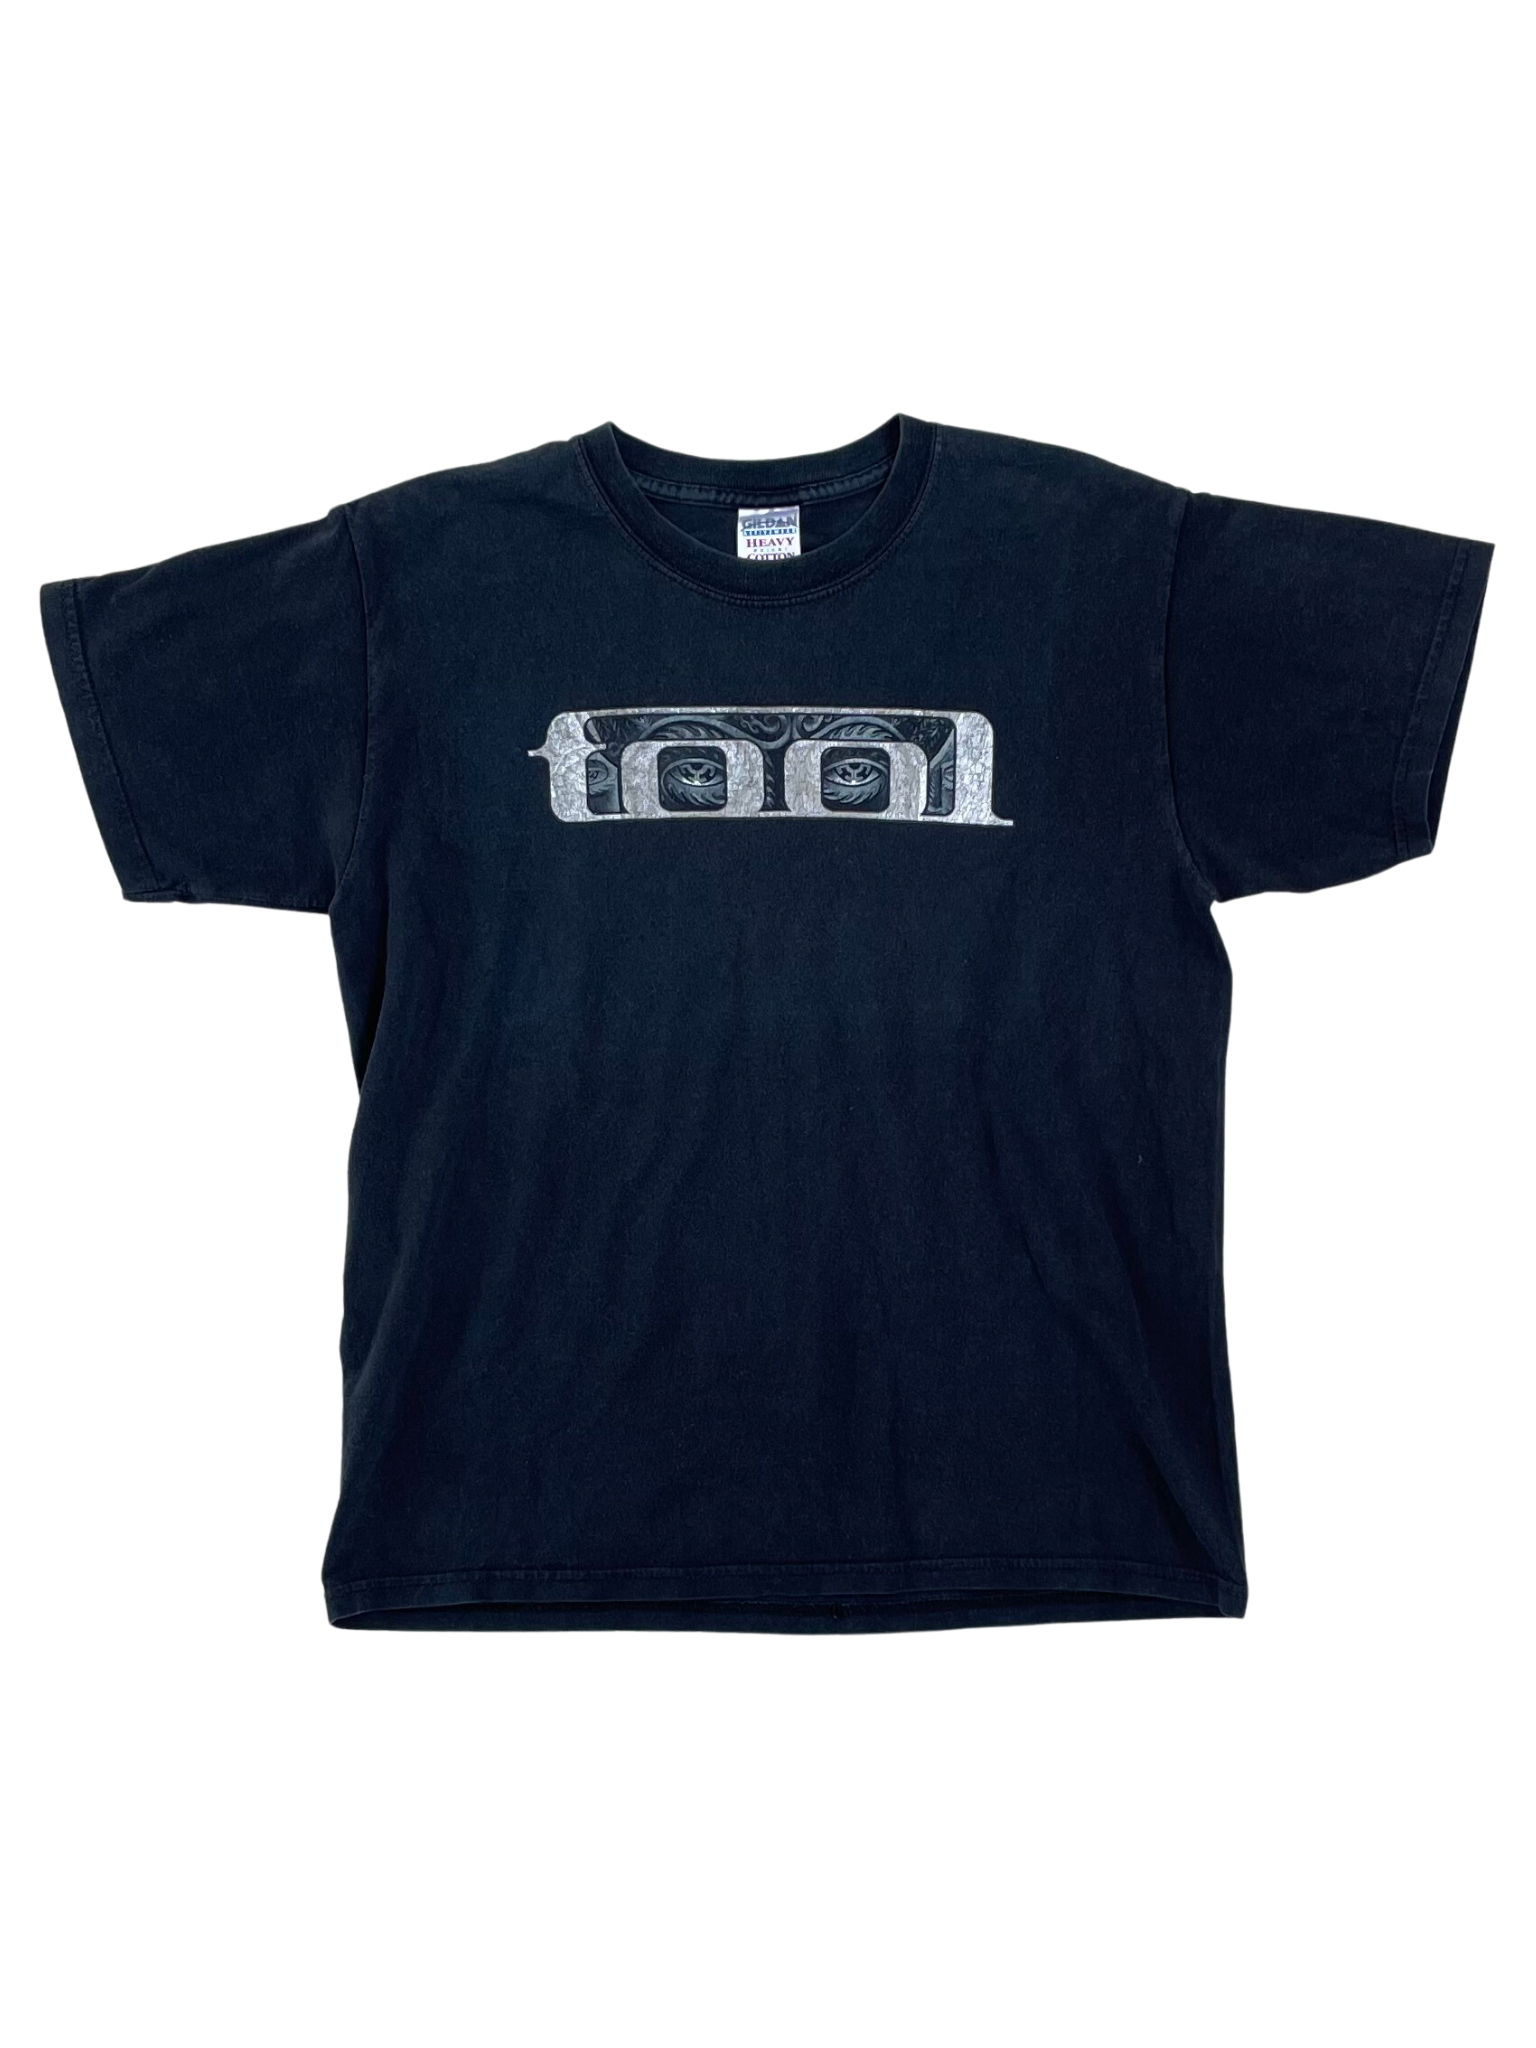 Tool band shirt from 2005